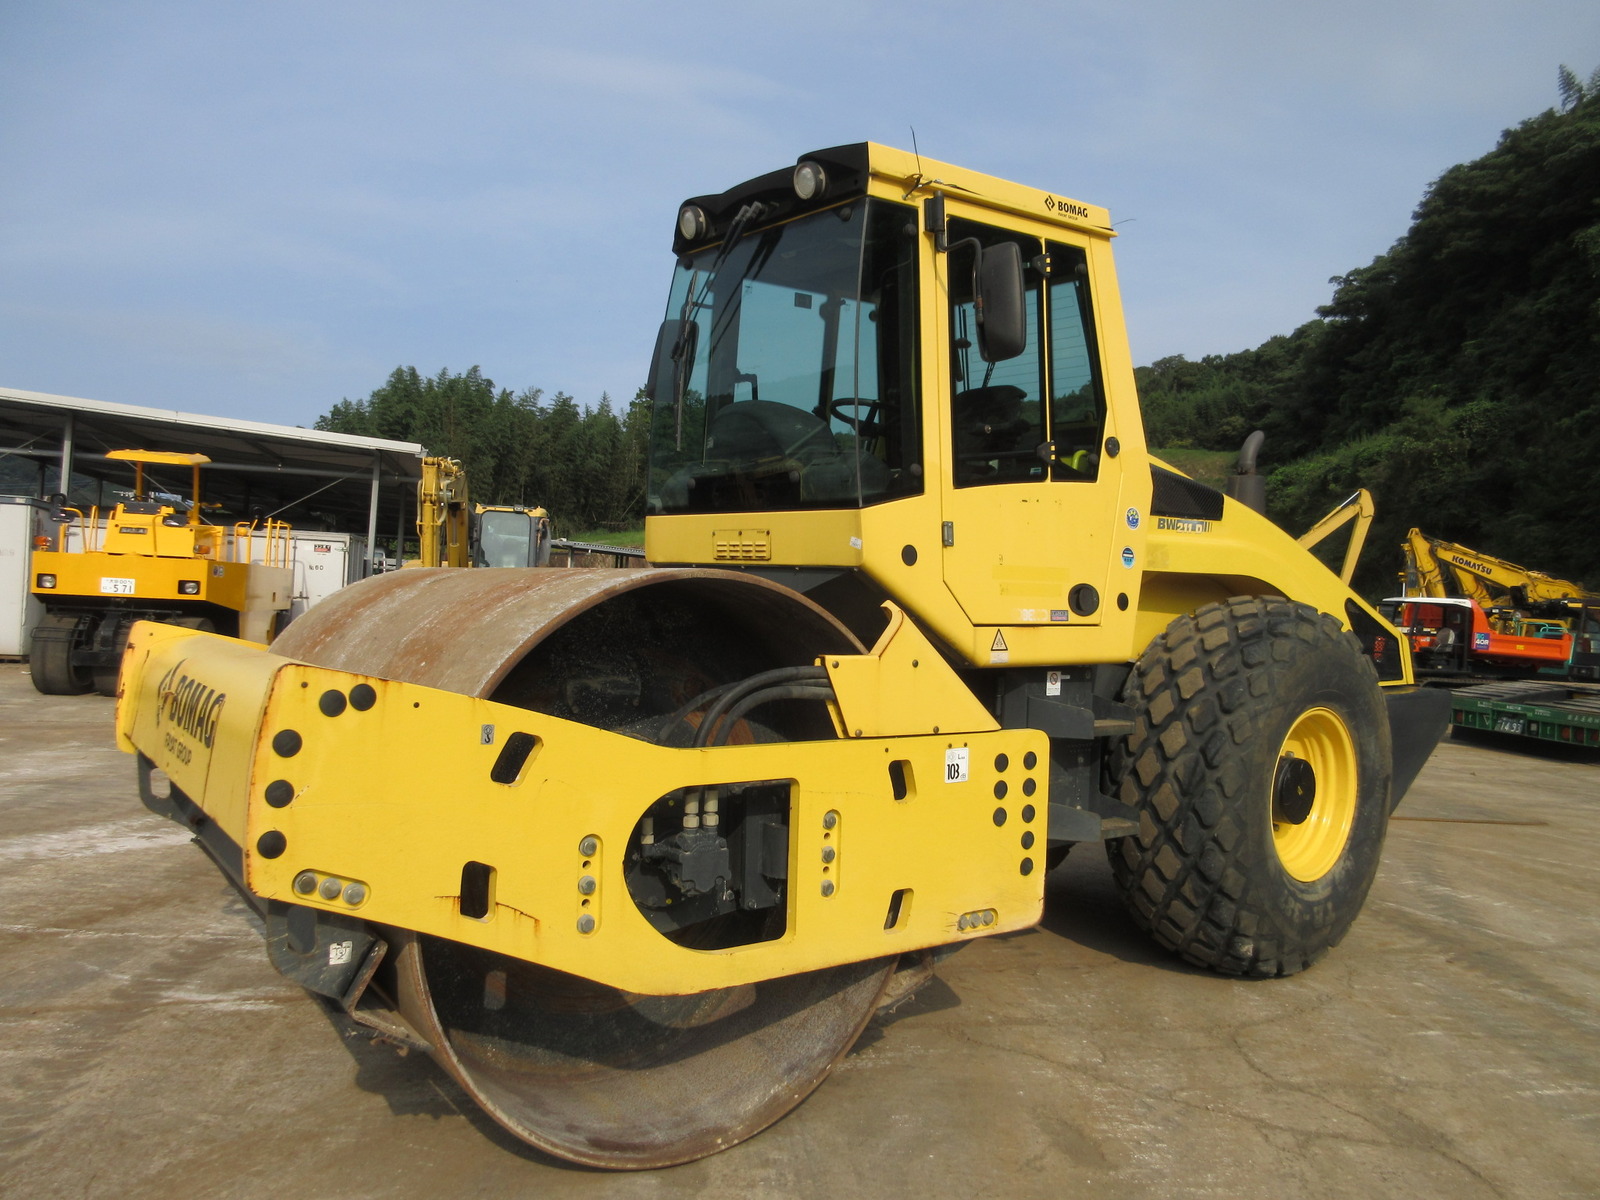 Used Construction Machine used  Roller Vibration rollers for earthwork BW211D-4 Photos